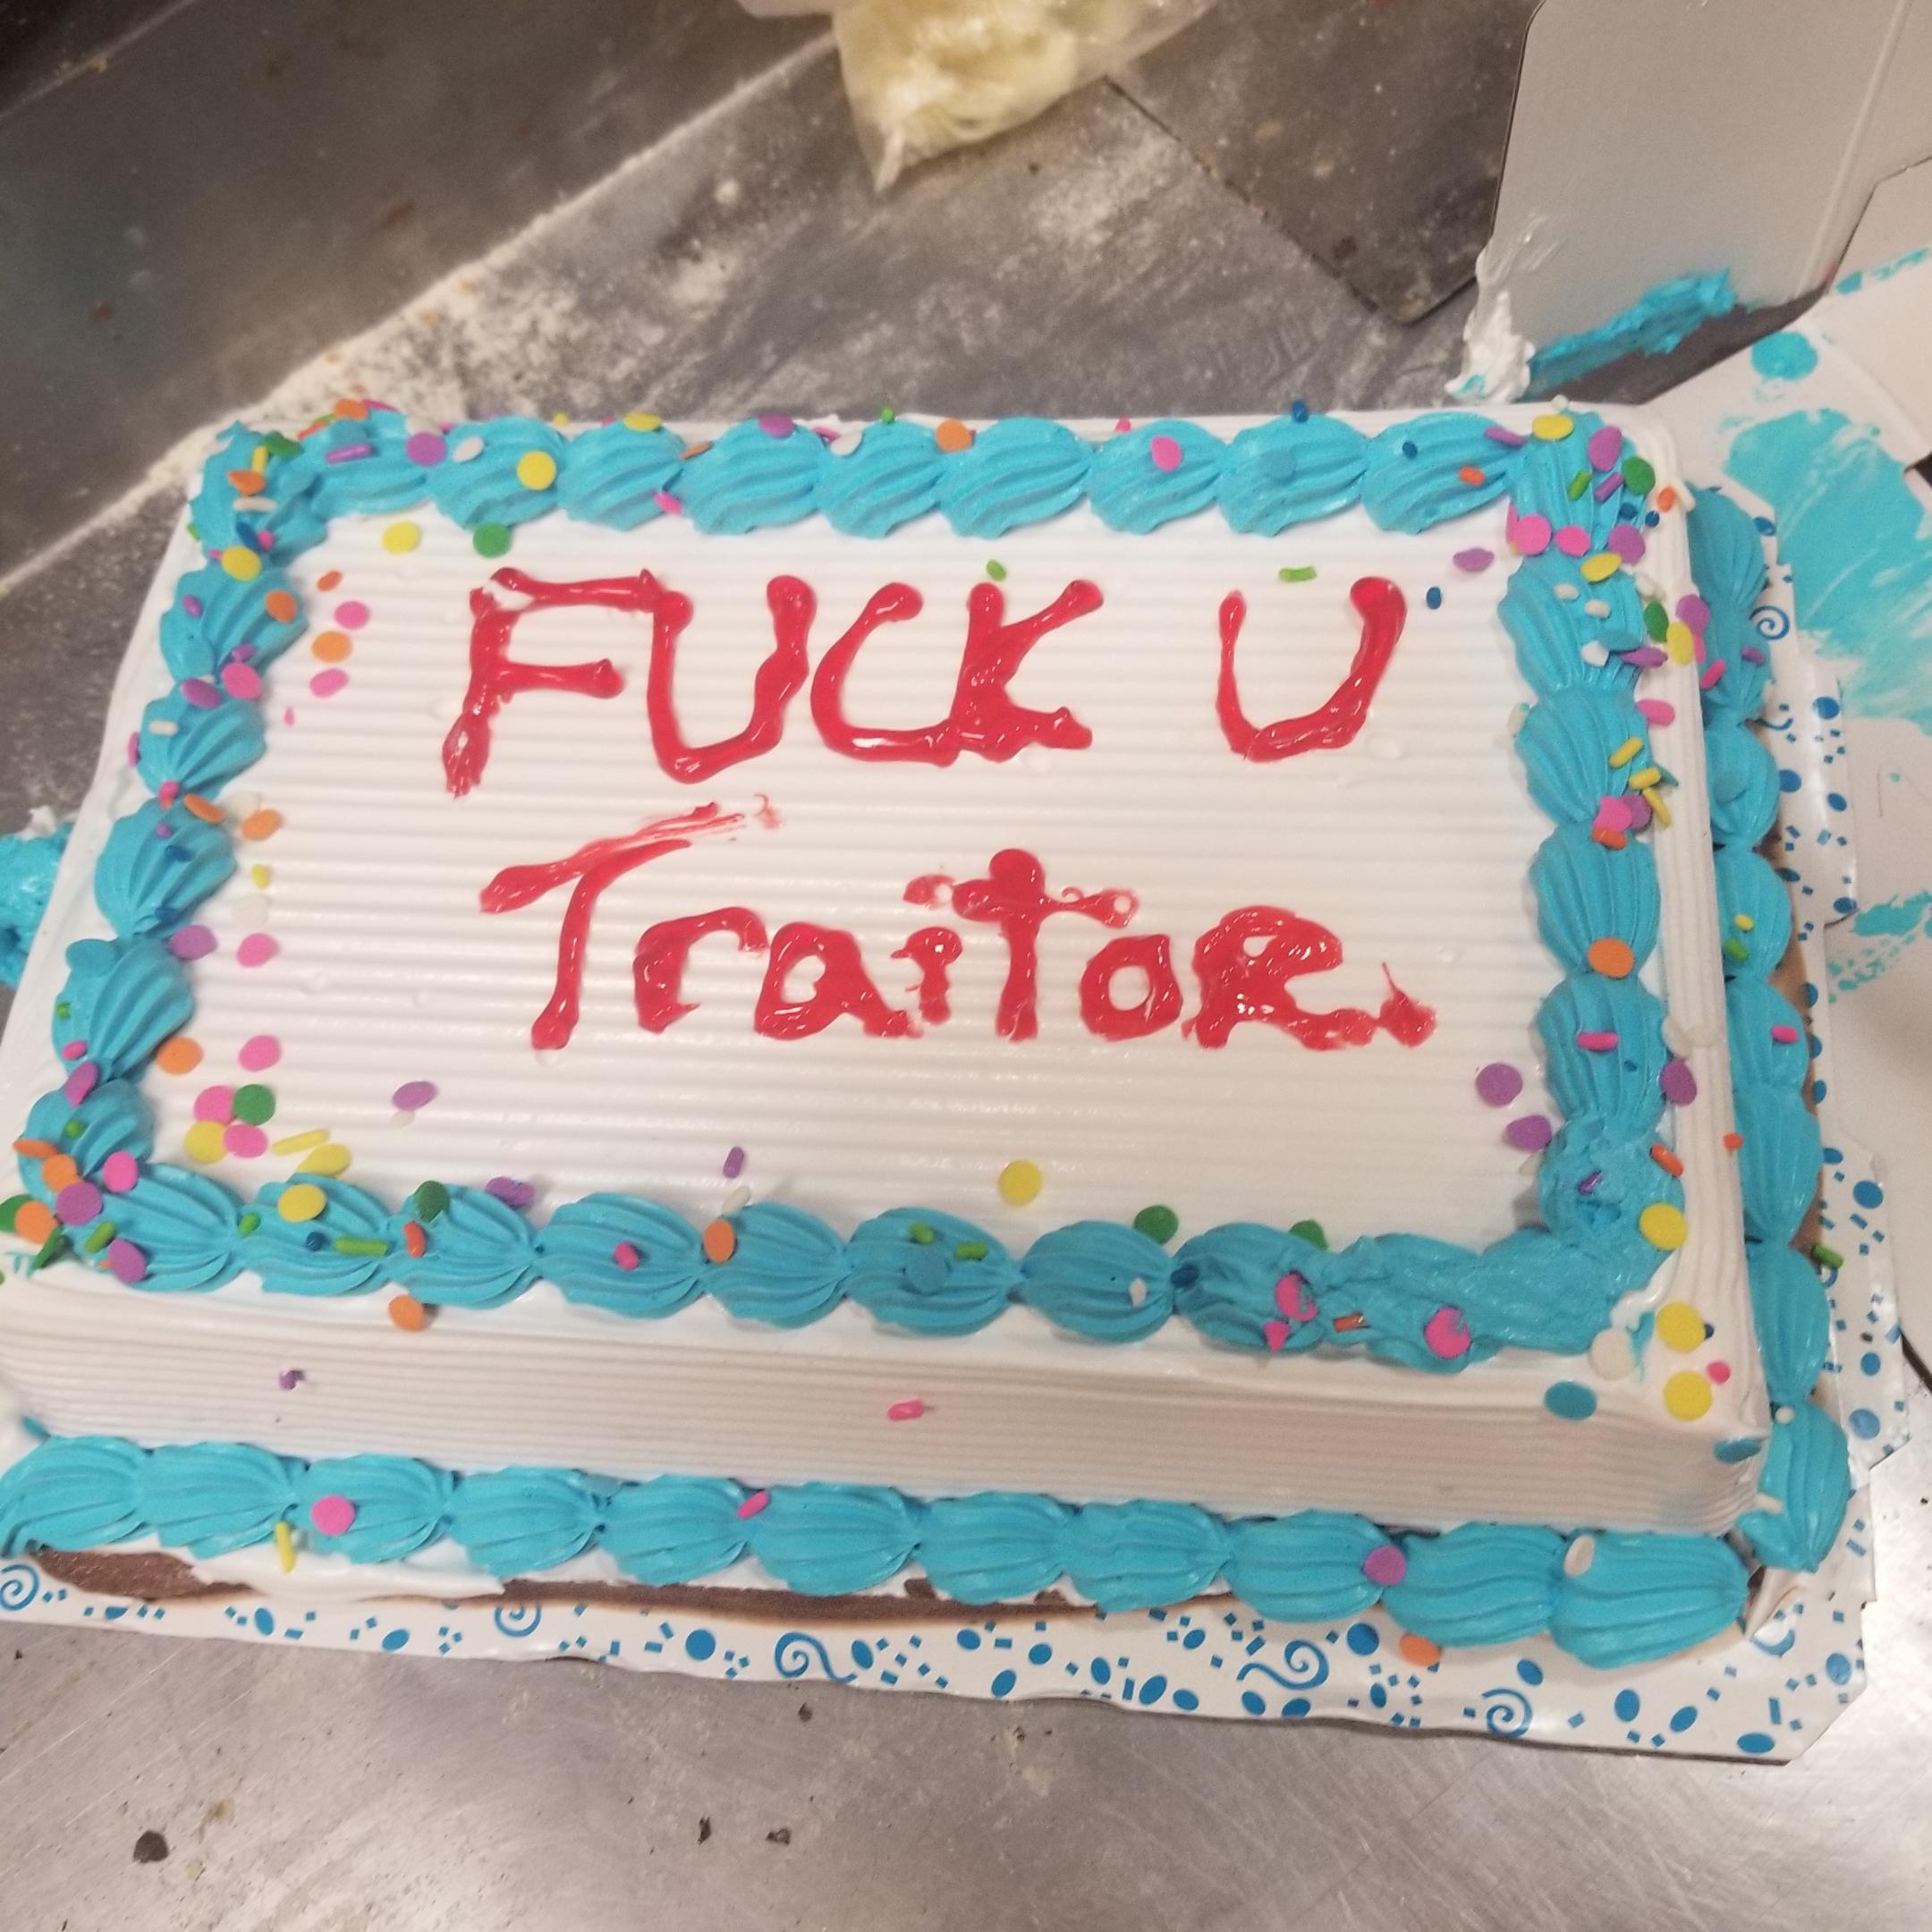 My last day at work cake after getting a new job